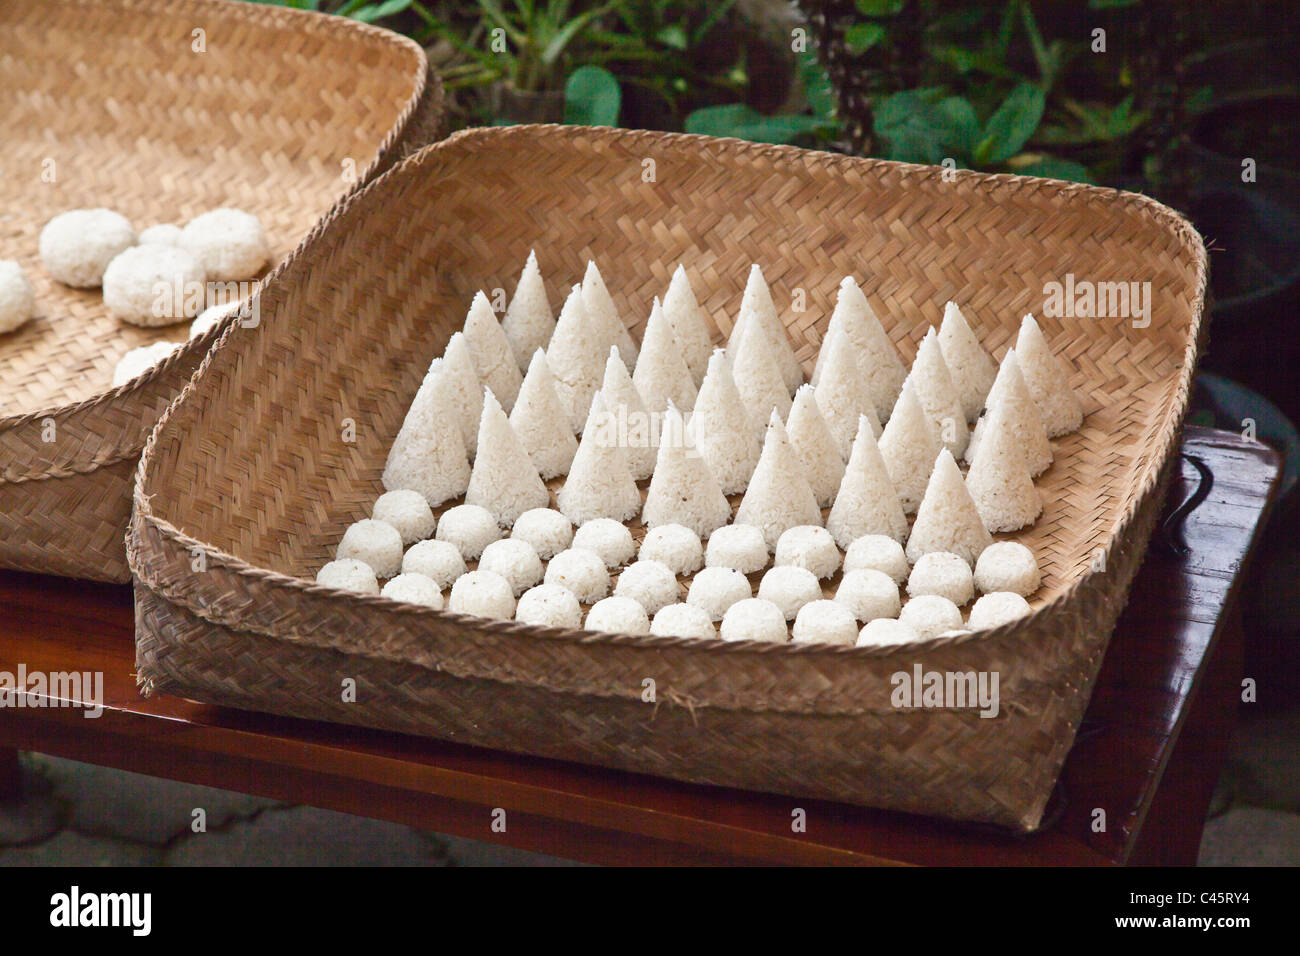 RICE is formed into offerings in the traditional Hindu village of PENGLIPURAN - BALI, INDONESIA Stock Photo